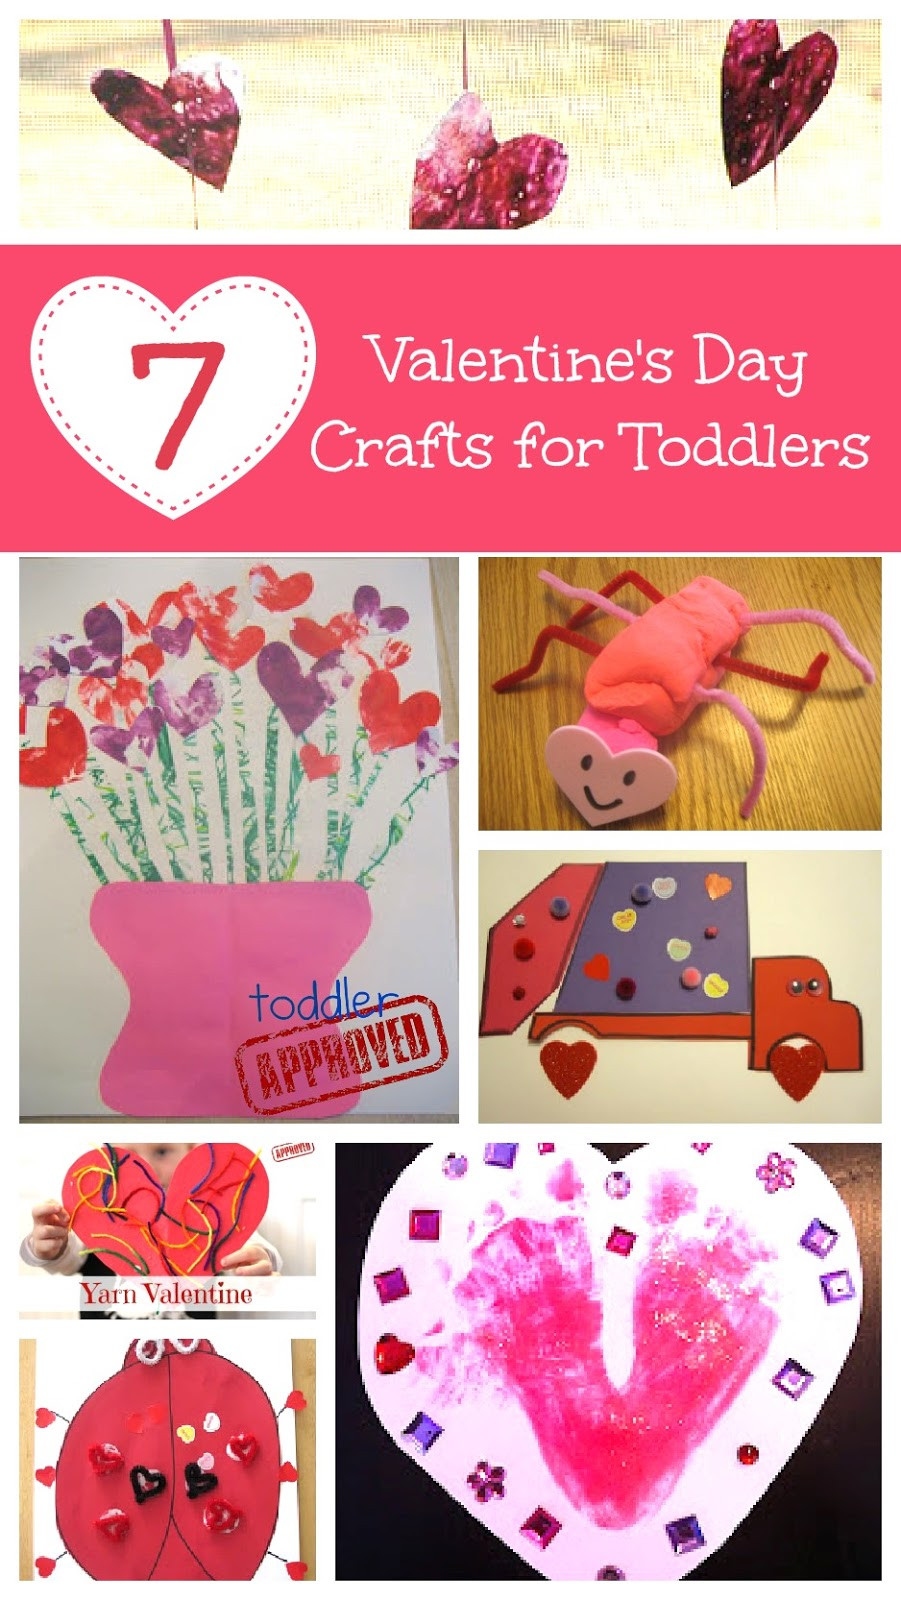 Valentines Day Crafts
 Toddler Approved 7 Valentine s Day Crafts for Toddlers